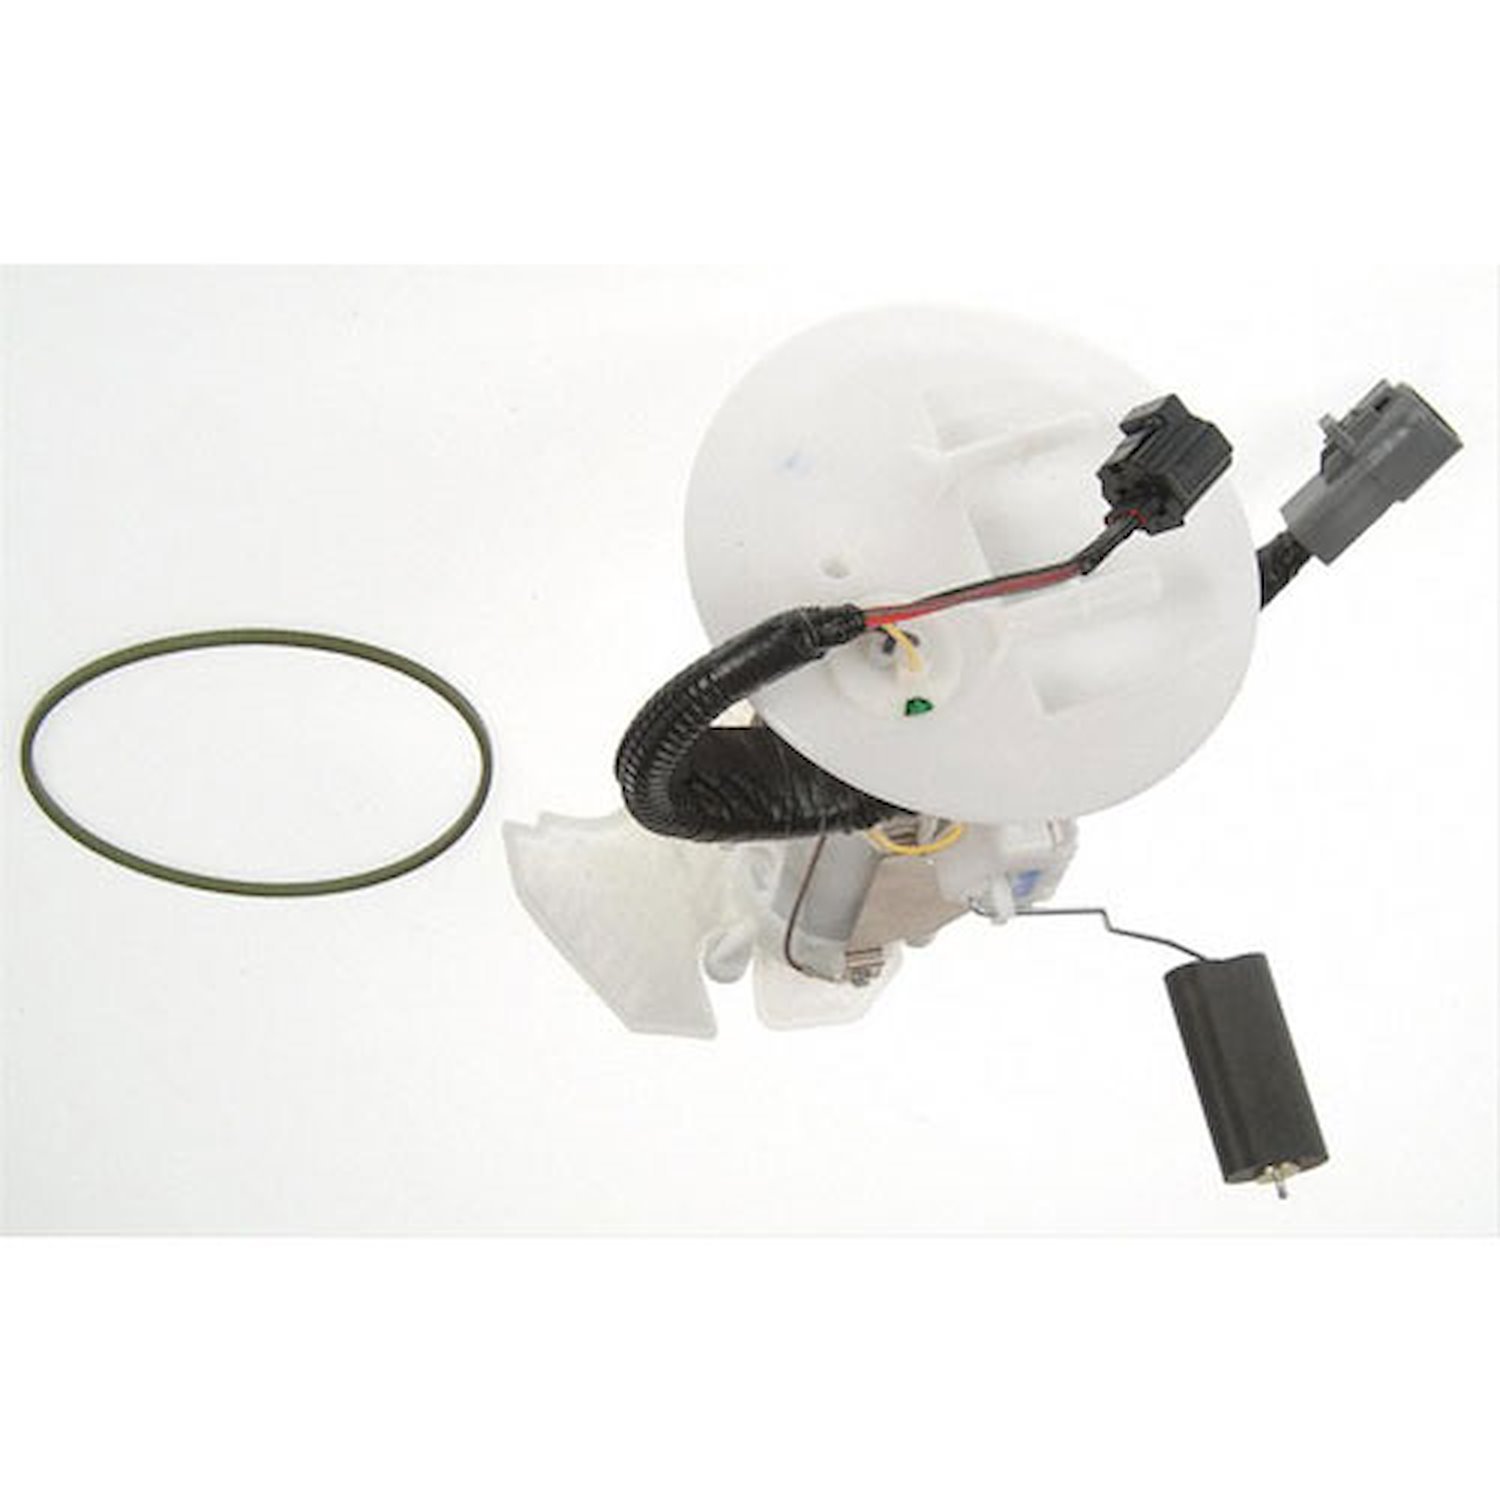 OE Ford Replacement Electric Fuel Pump Module Assembly 2001-02 Ford Explorer 4.0L V6